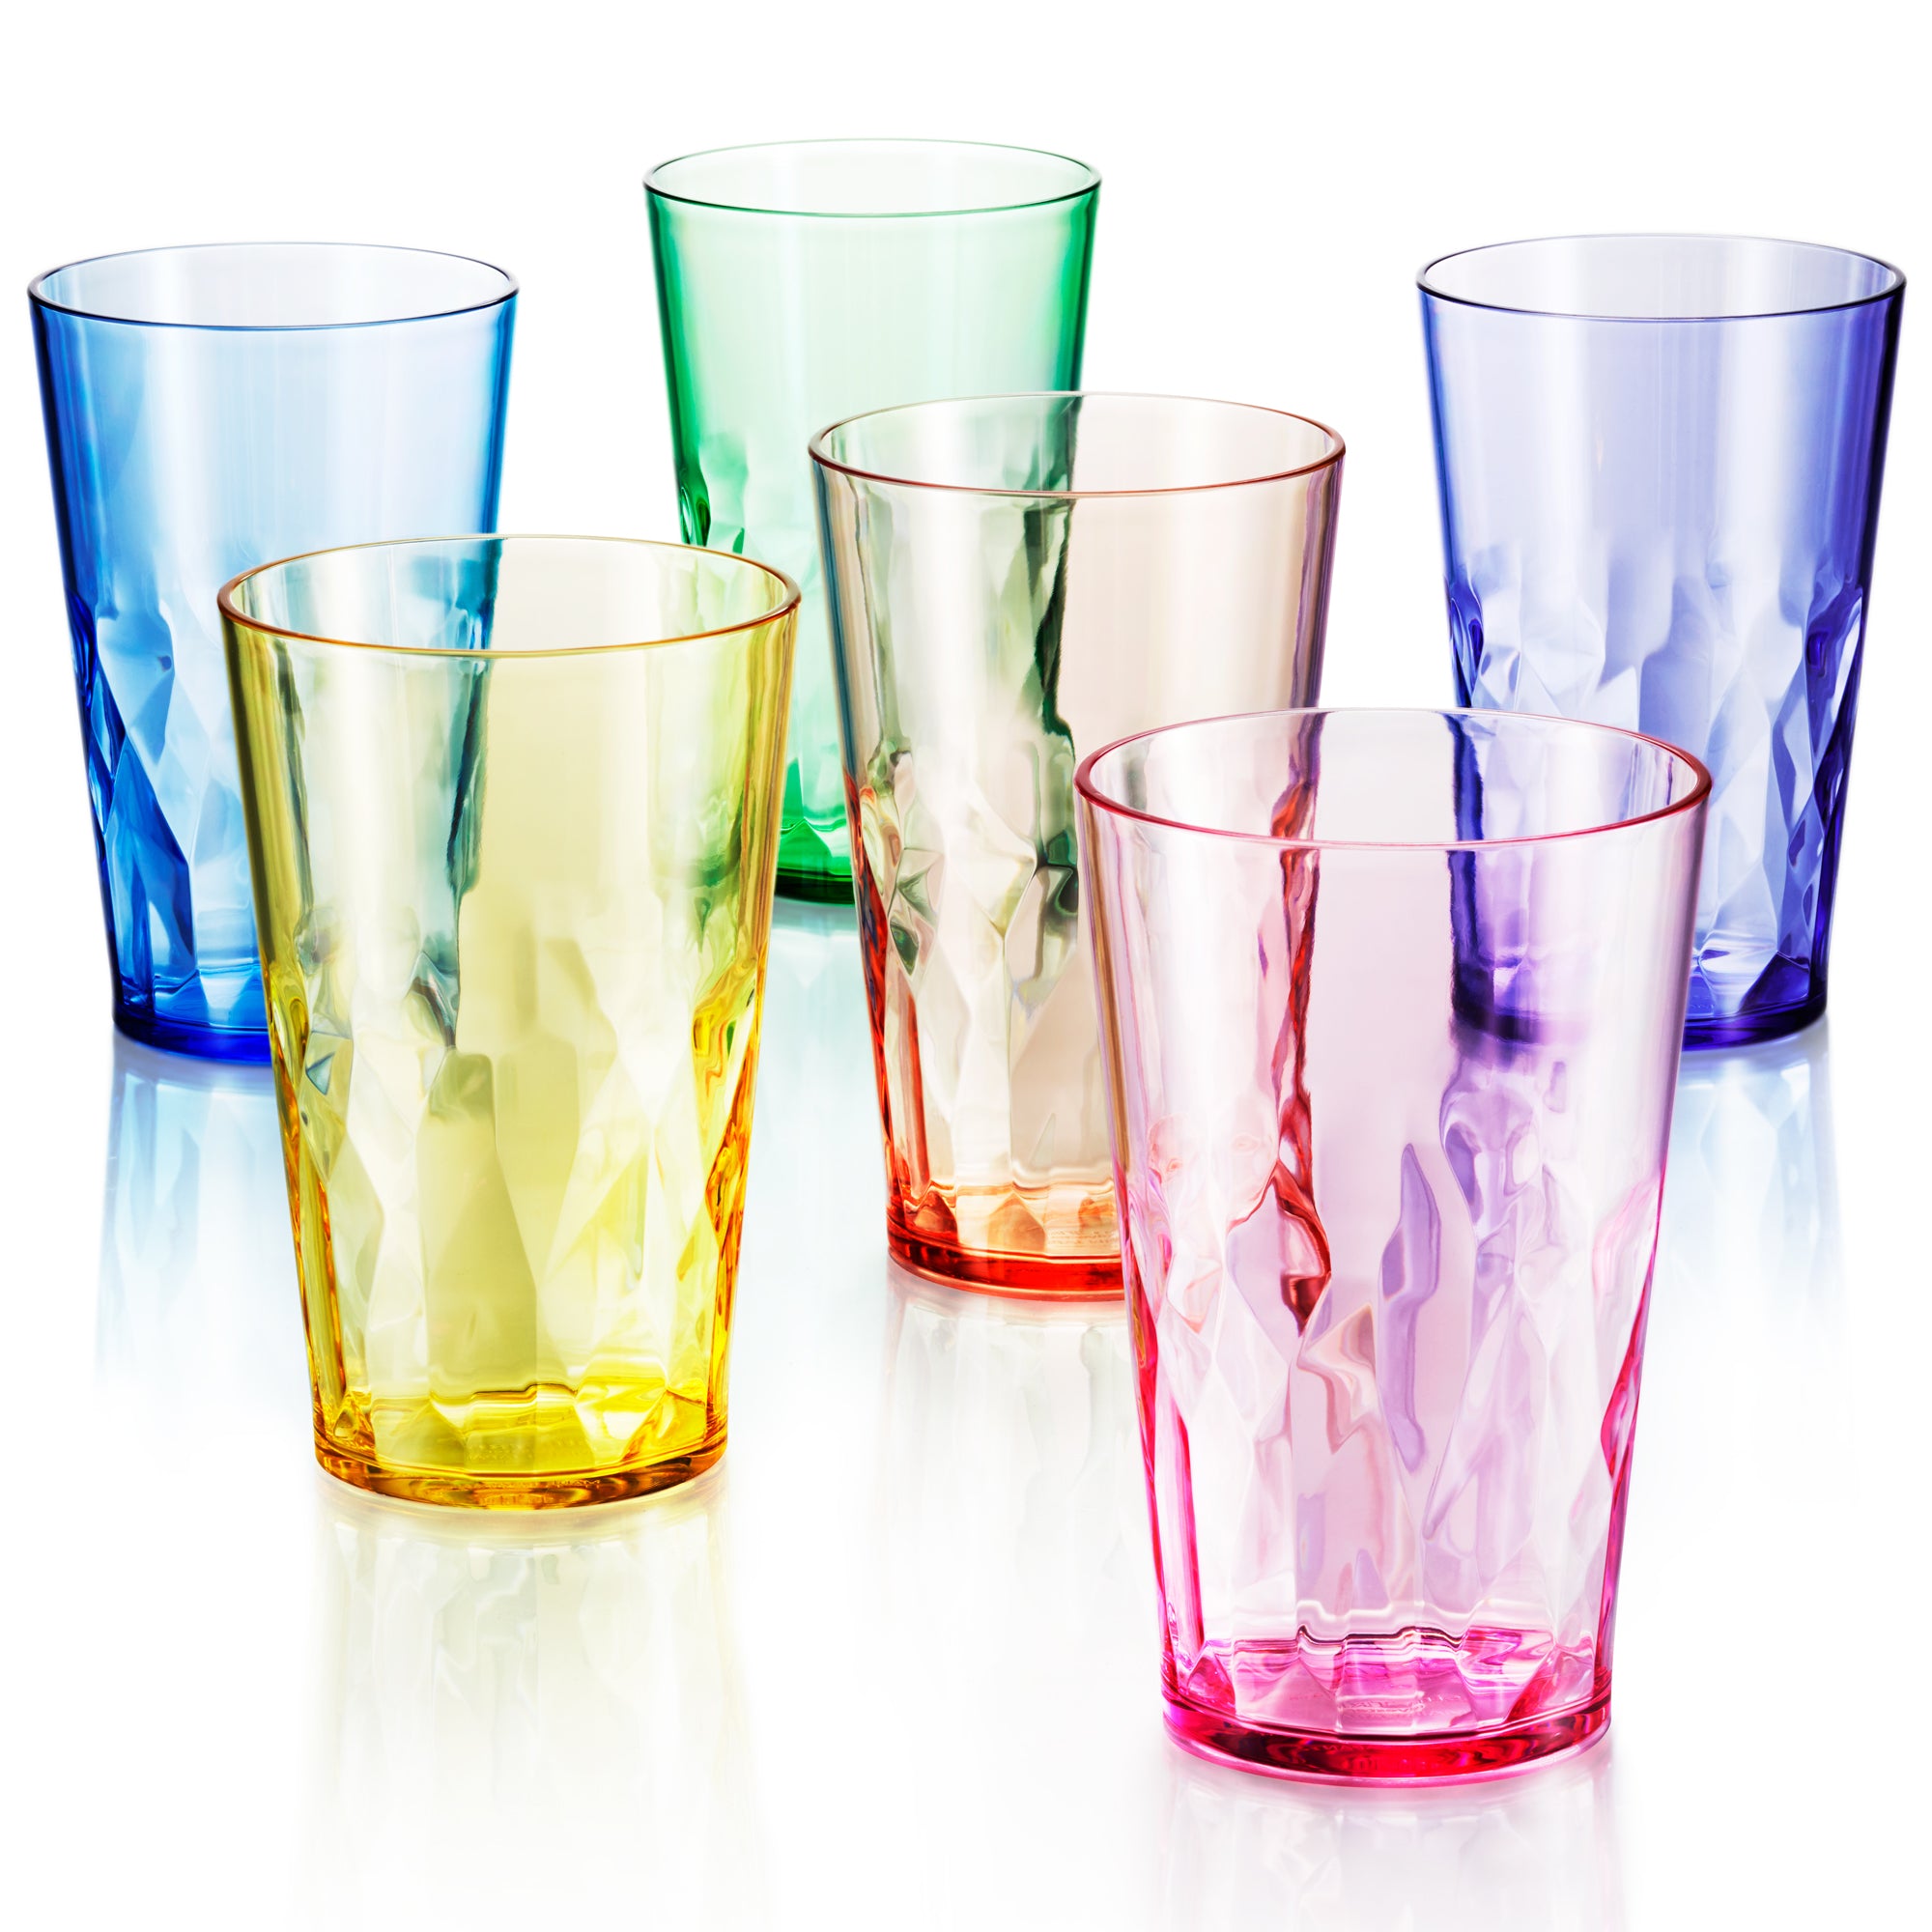 13 oz Unbreakable Premium Drinking Glasses - Set of 6 - Tritan Plastic Cups  - BPA Free - 100% Made in Japan (Assorted Colors) - UPC:641945603491